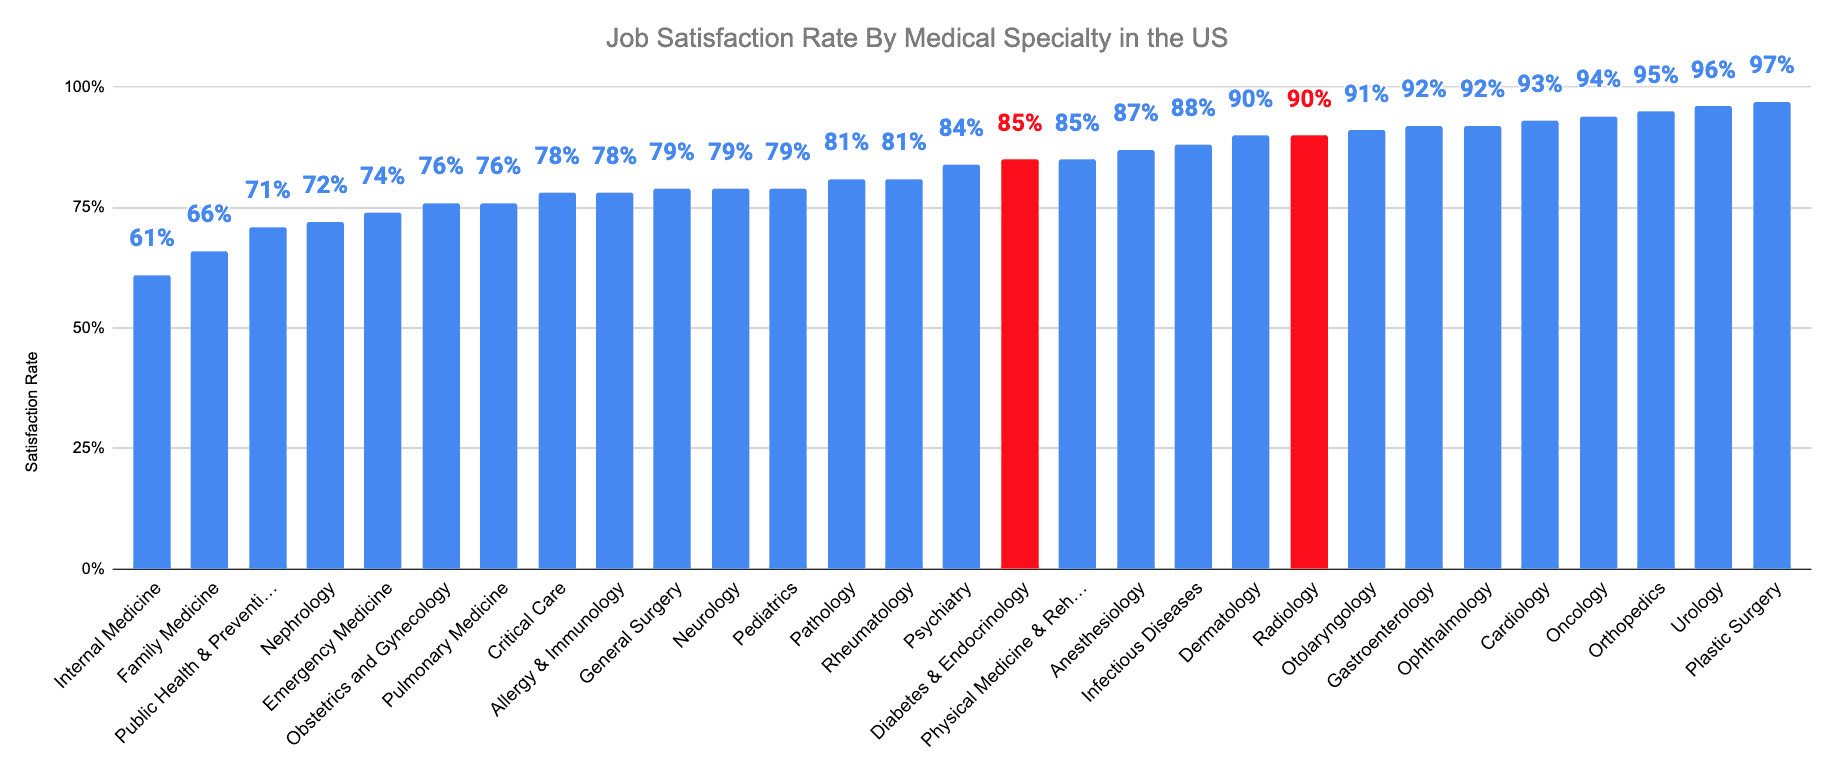 Job Satisfaction Rate By Medical Specialty in the US